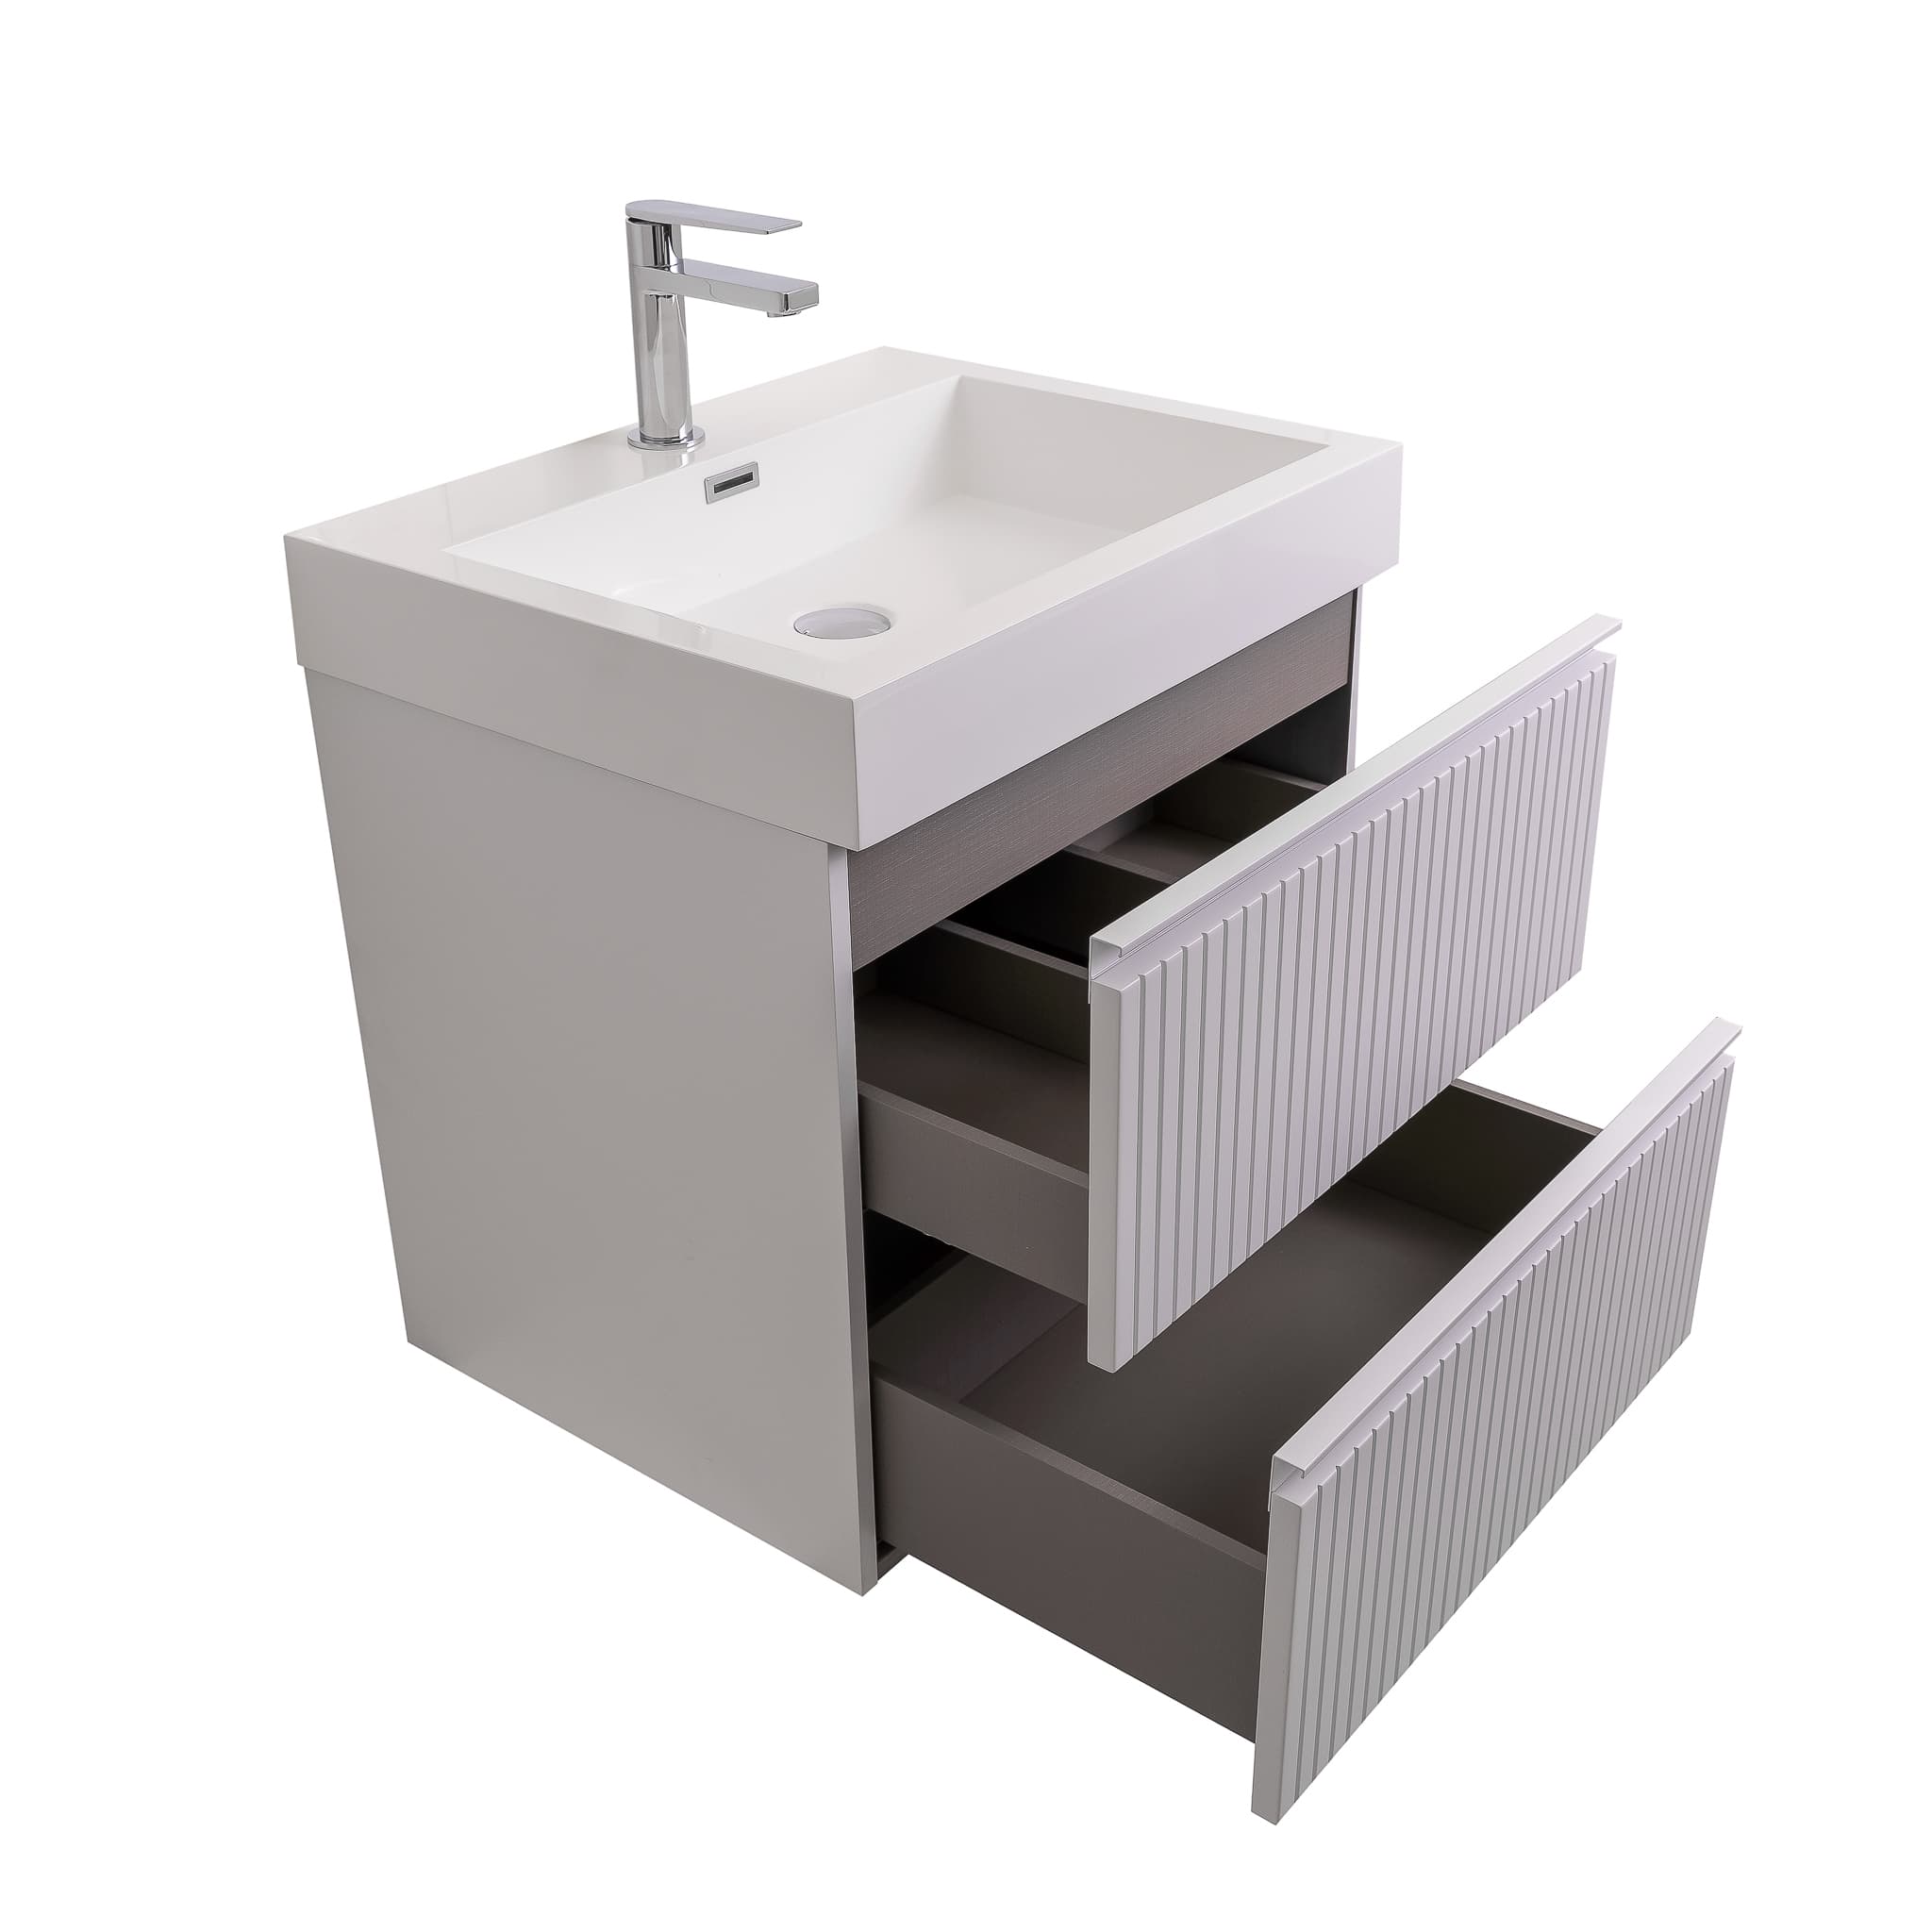 Ares 23.5 Matte White Cabinet, Square Cultured Marble Sink, Wall Mounted Modern Vanity Set